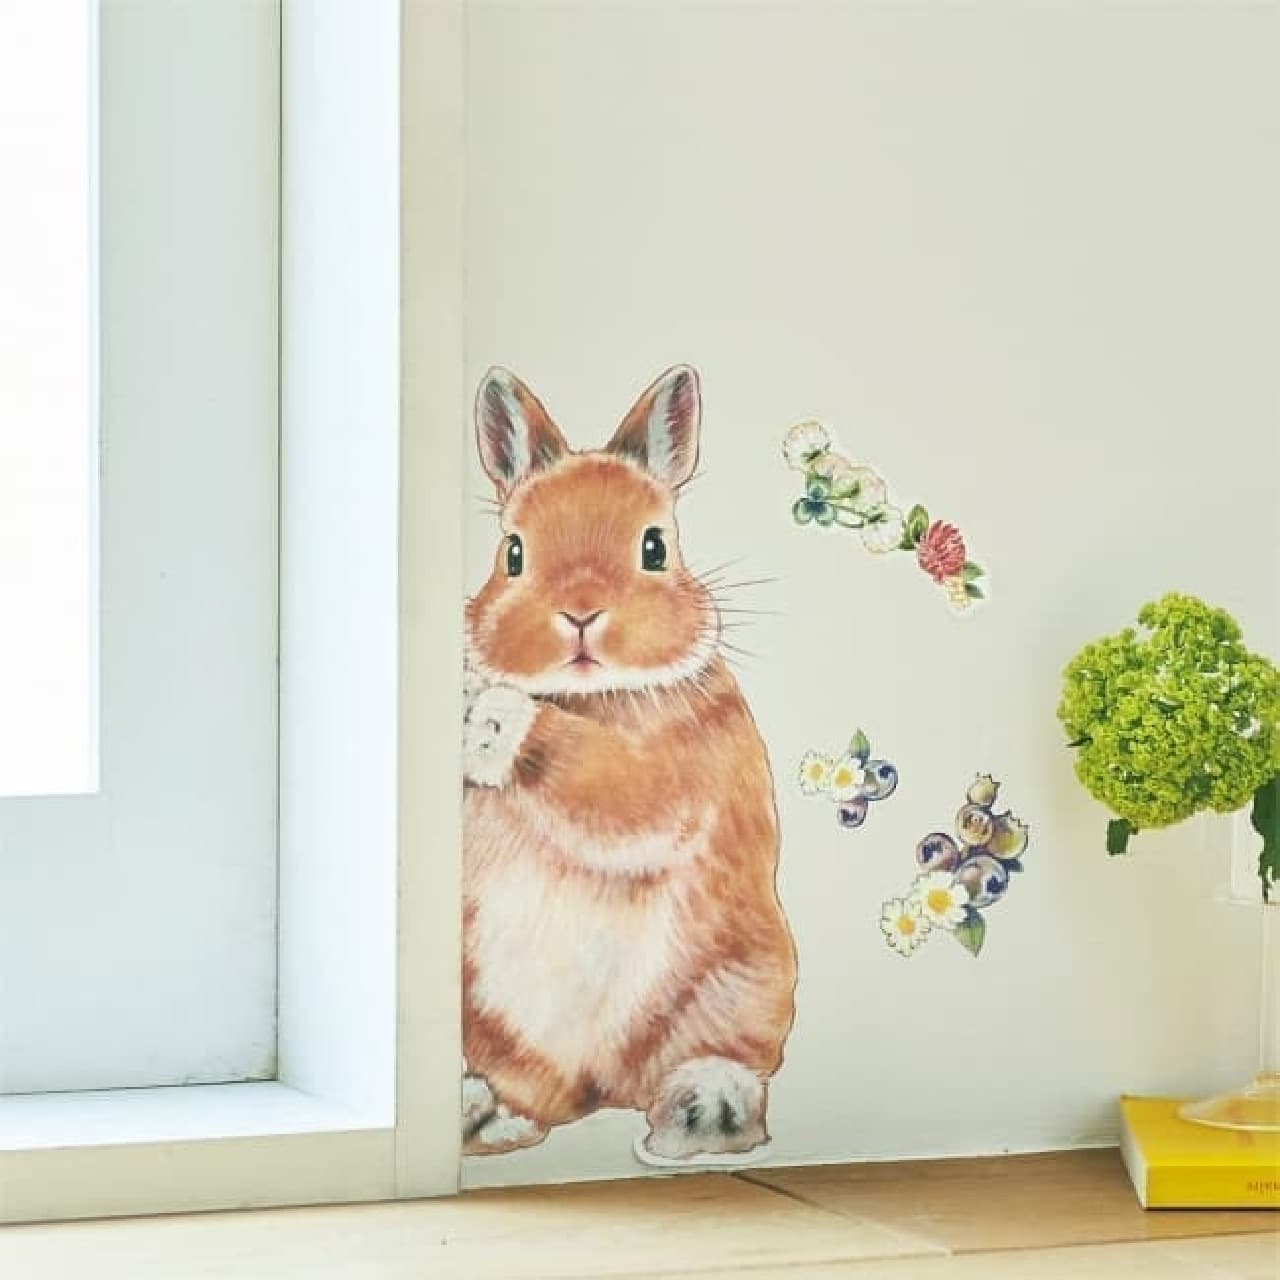 From YOU + MORE !, "Pyokotto Peeping Rabbit Wall Sticker"